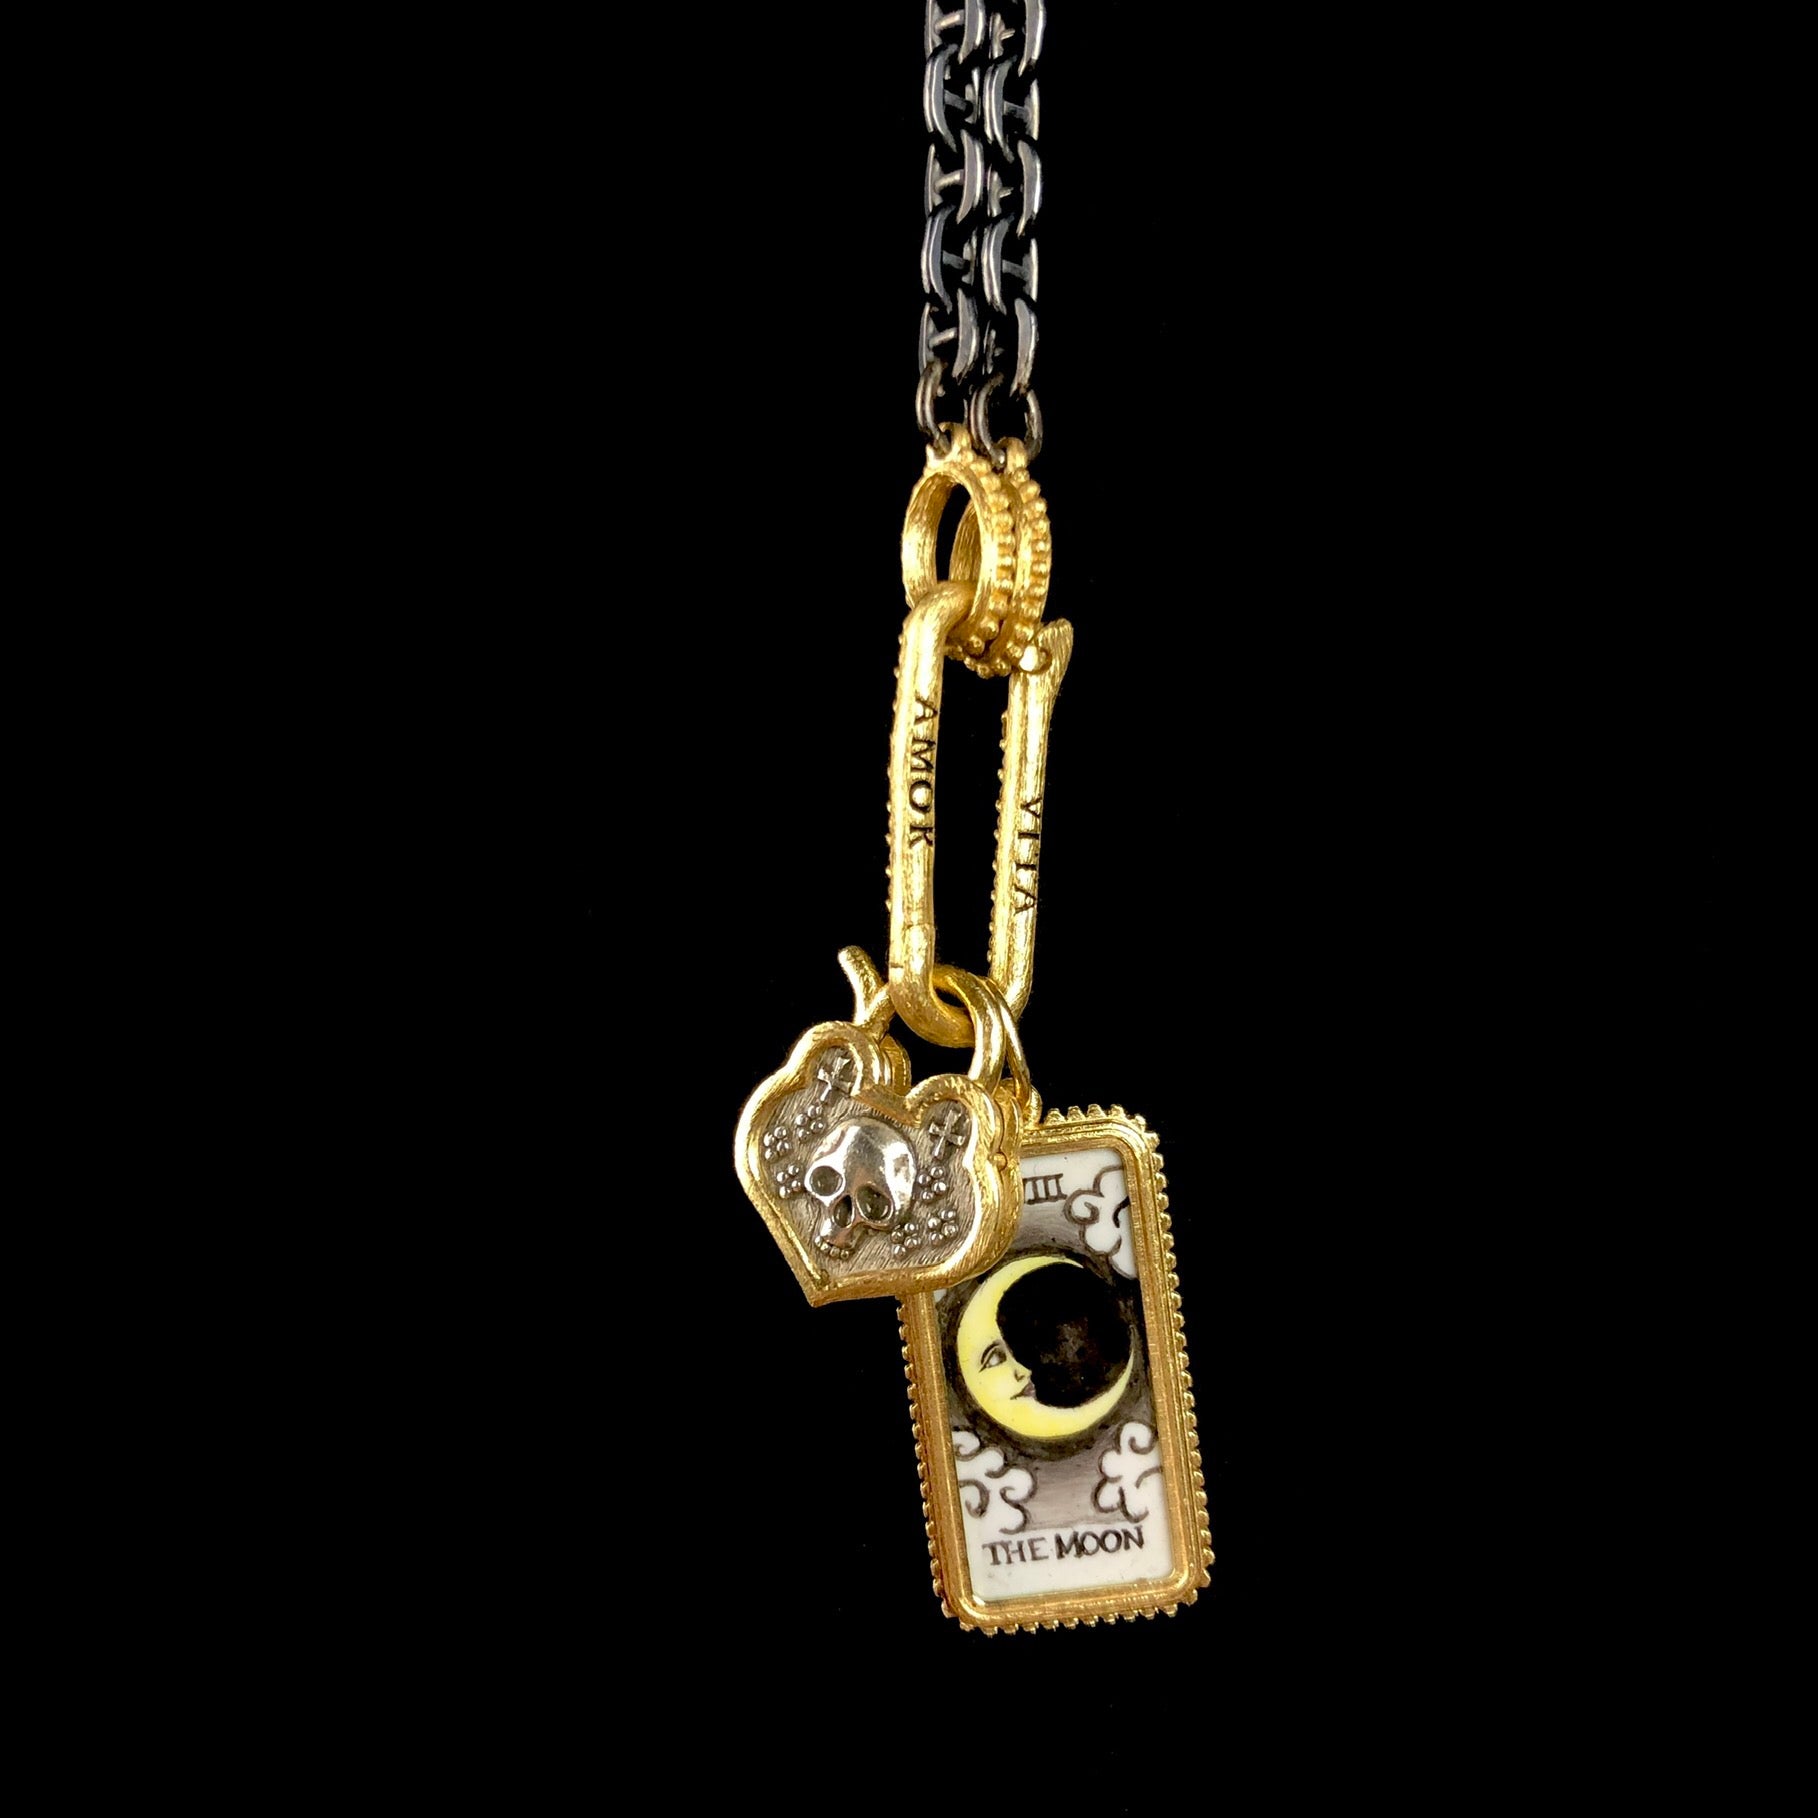 Moon Tarot Card Charm with Skull Padlock, Diamond Charm Holder and Gold Ended Chain 